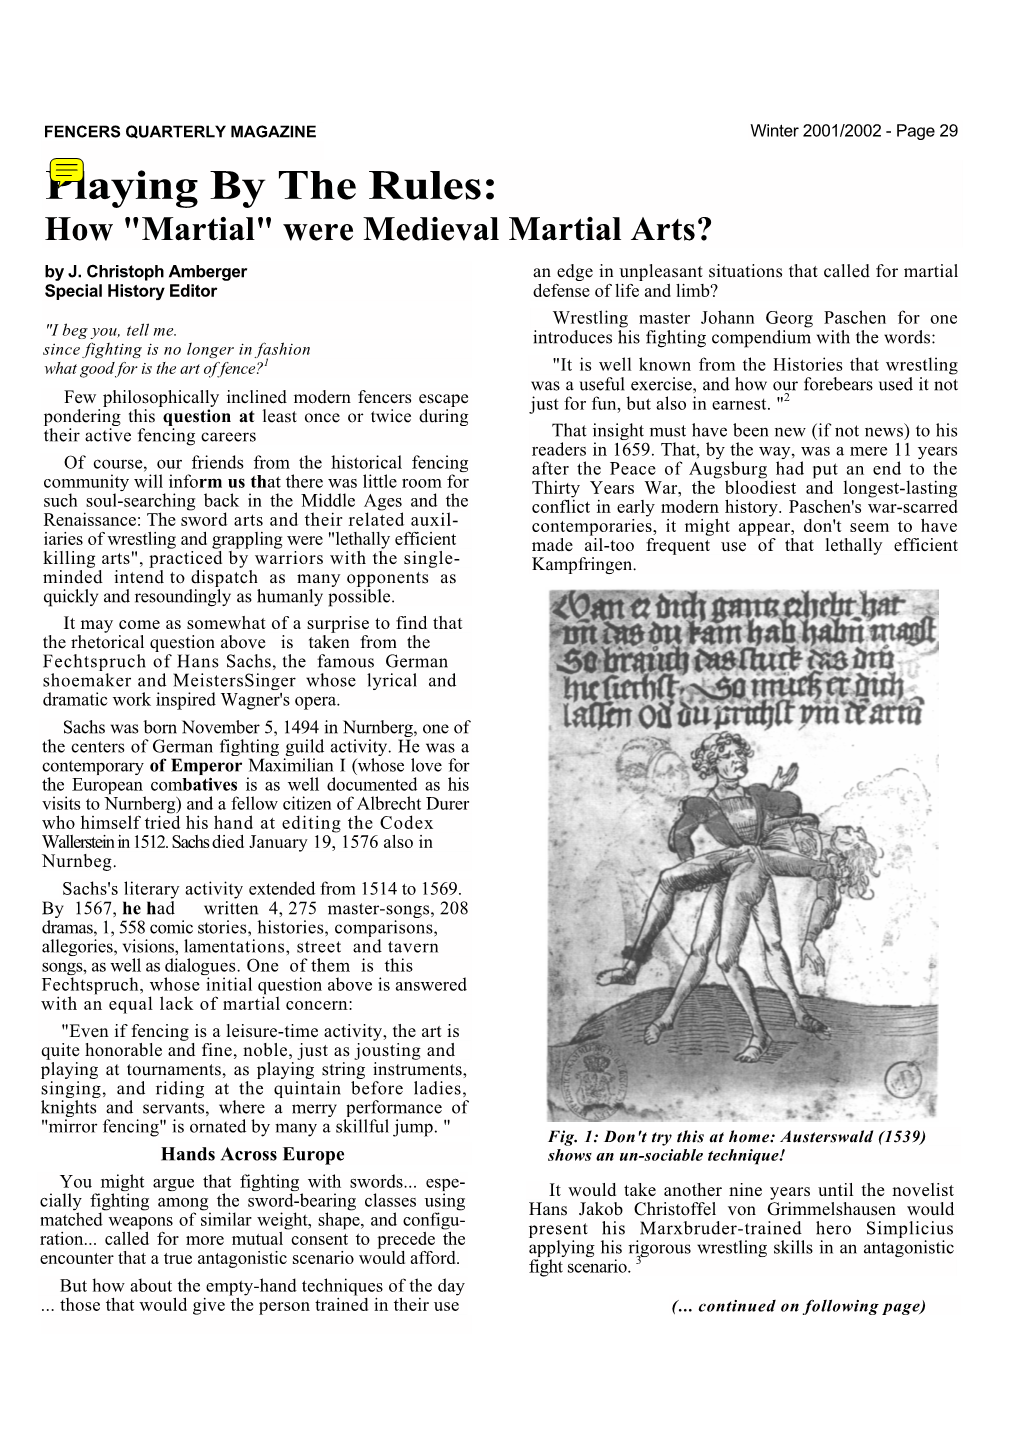 Playing by the Rules: How "Martial" Were Medieval Martial Arts? by J